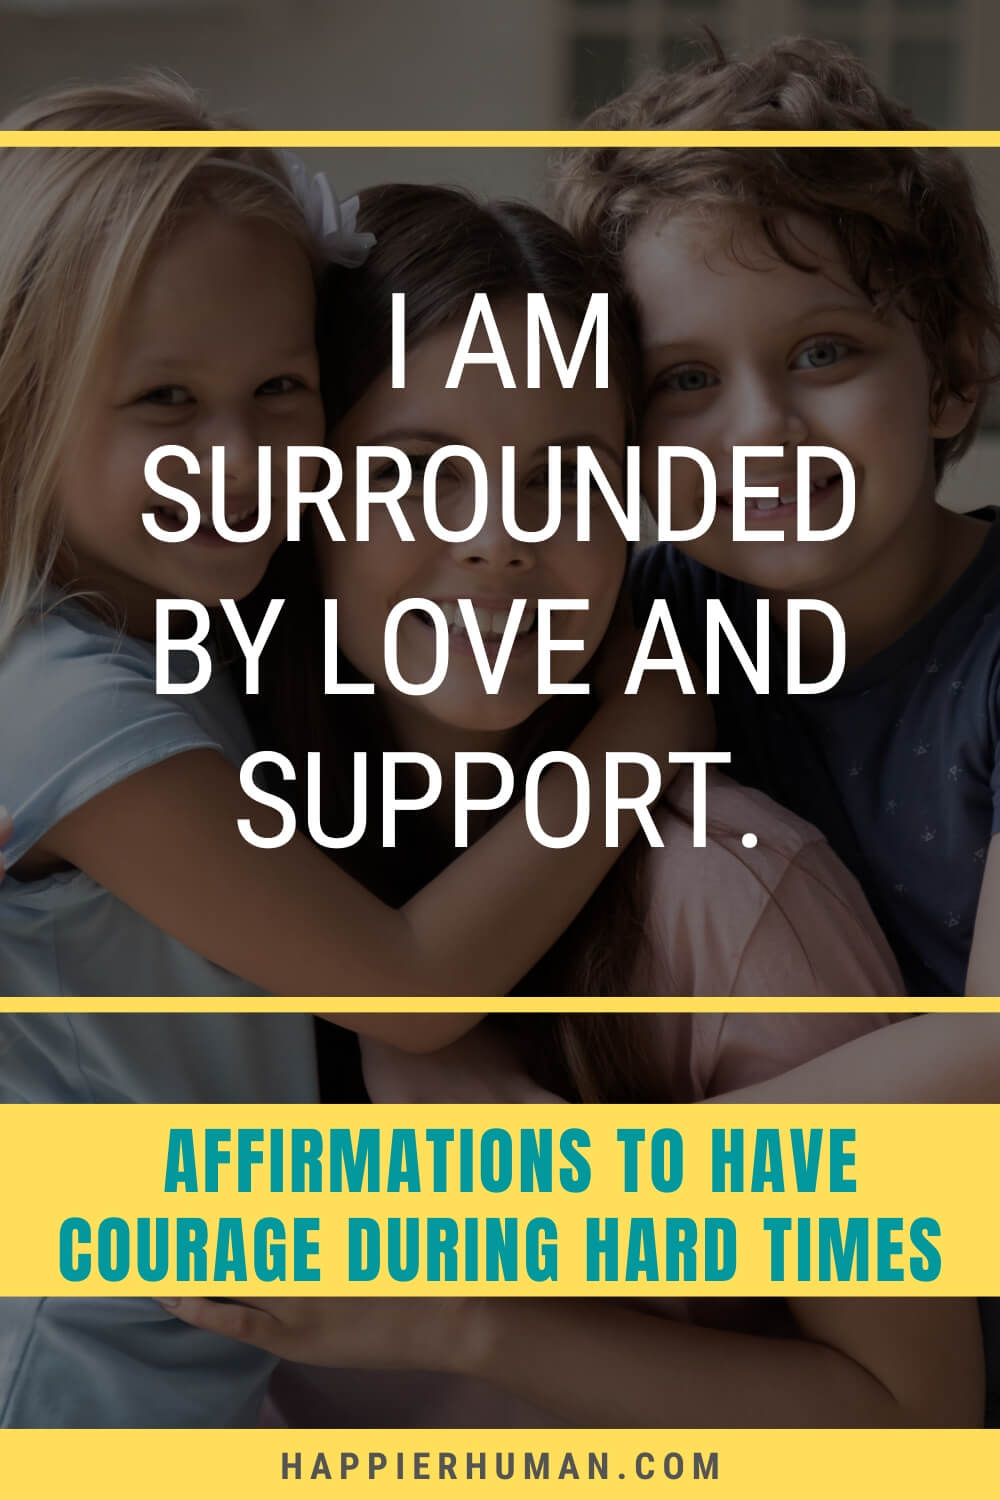 affirmations for positive thinking | affirmations for strength | affirmations for mental health recovery
